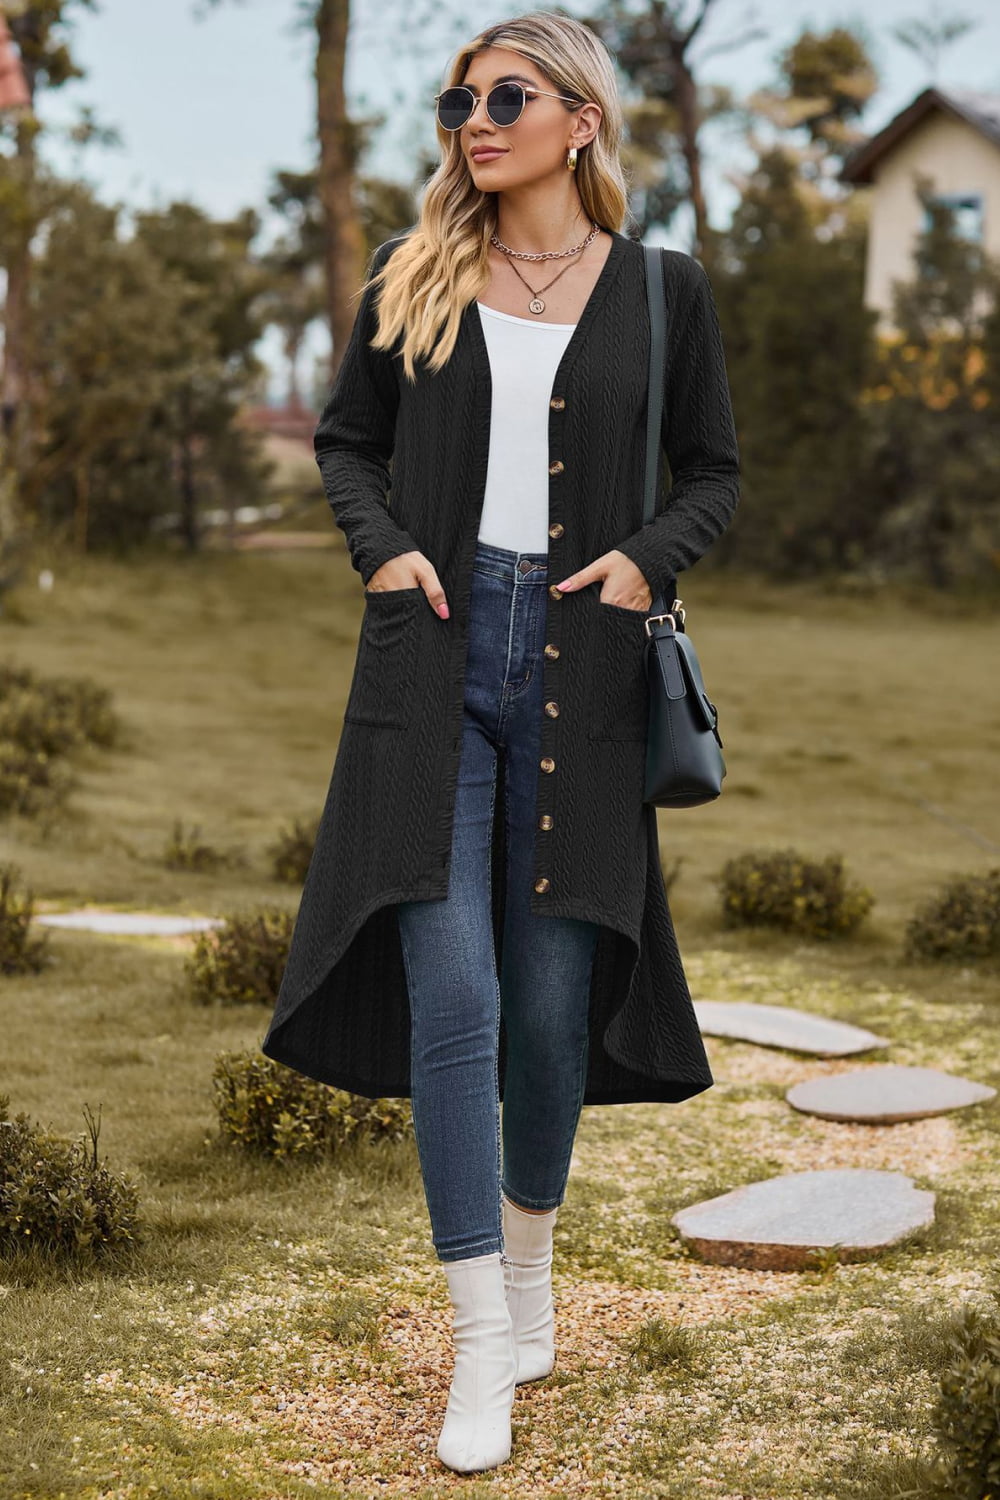 V-Neck Long Sleeve Cardigan with Pocket - Black / S - Women’s Clothing & Accessories - Shirts & Tops - 18 - 2024